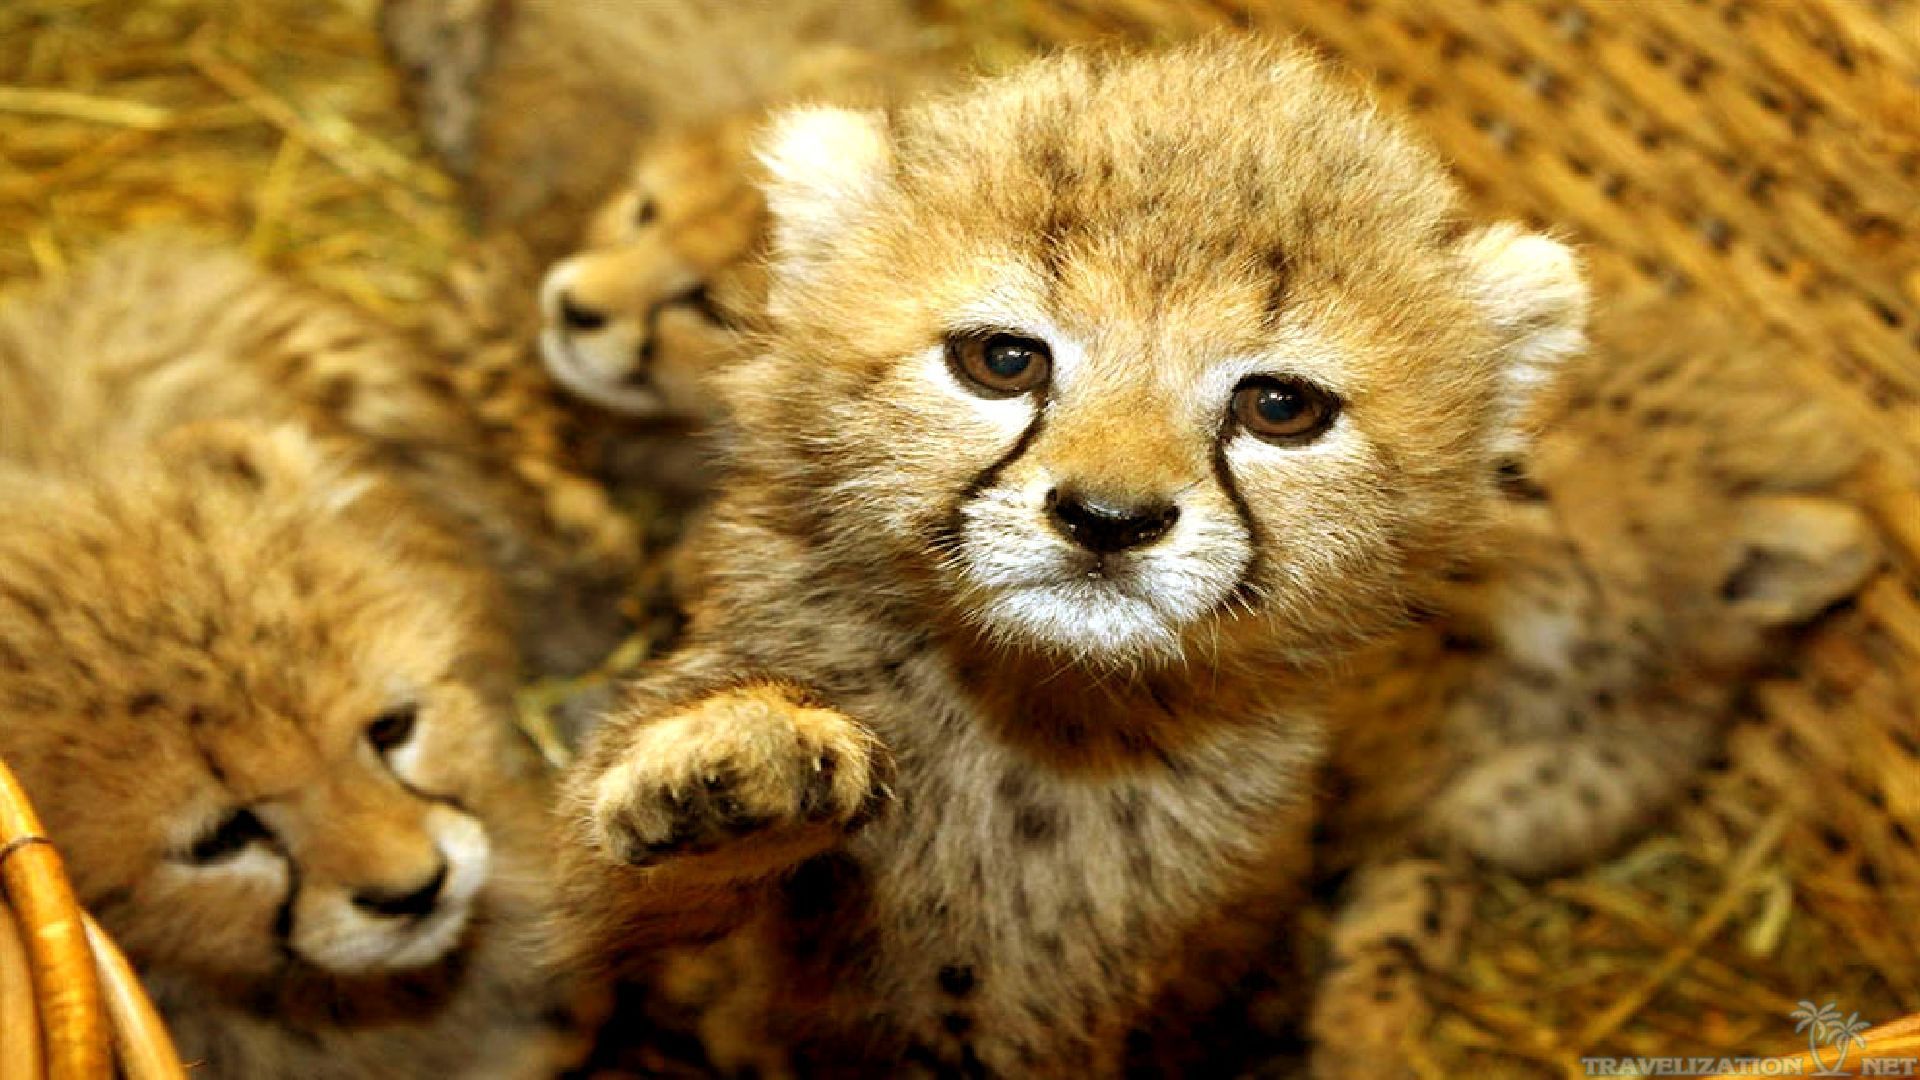 Baby Animals Cute Sweet Tiget Wallpaper with 1920x1080